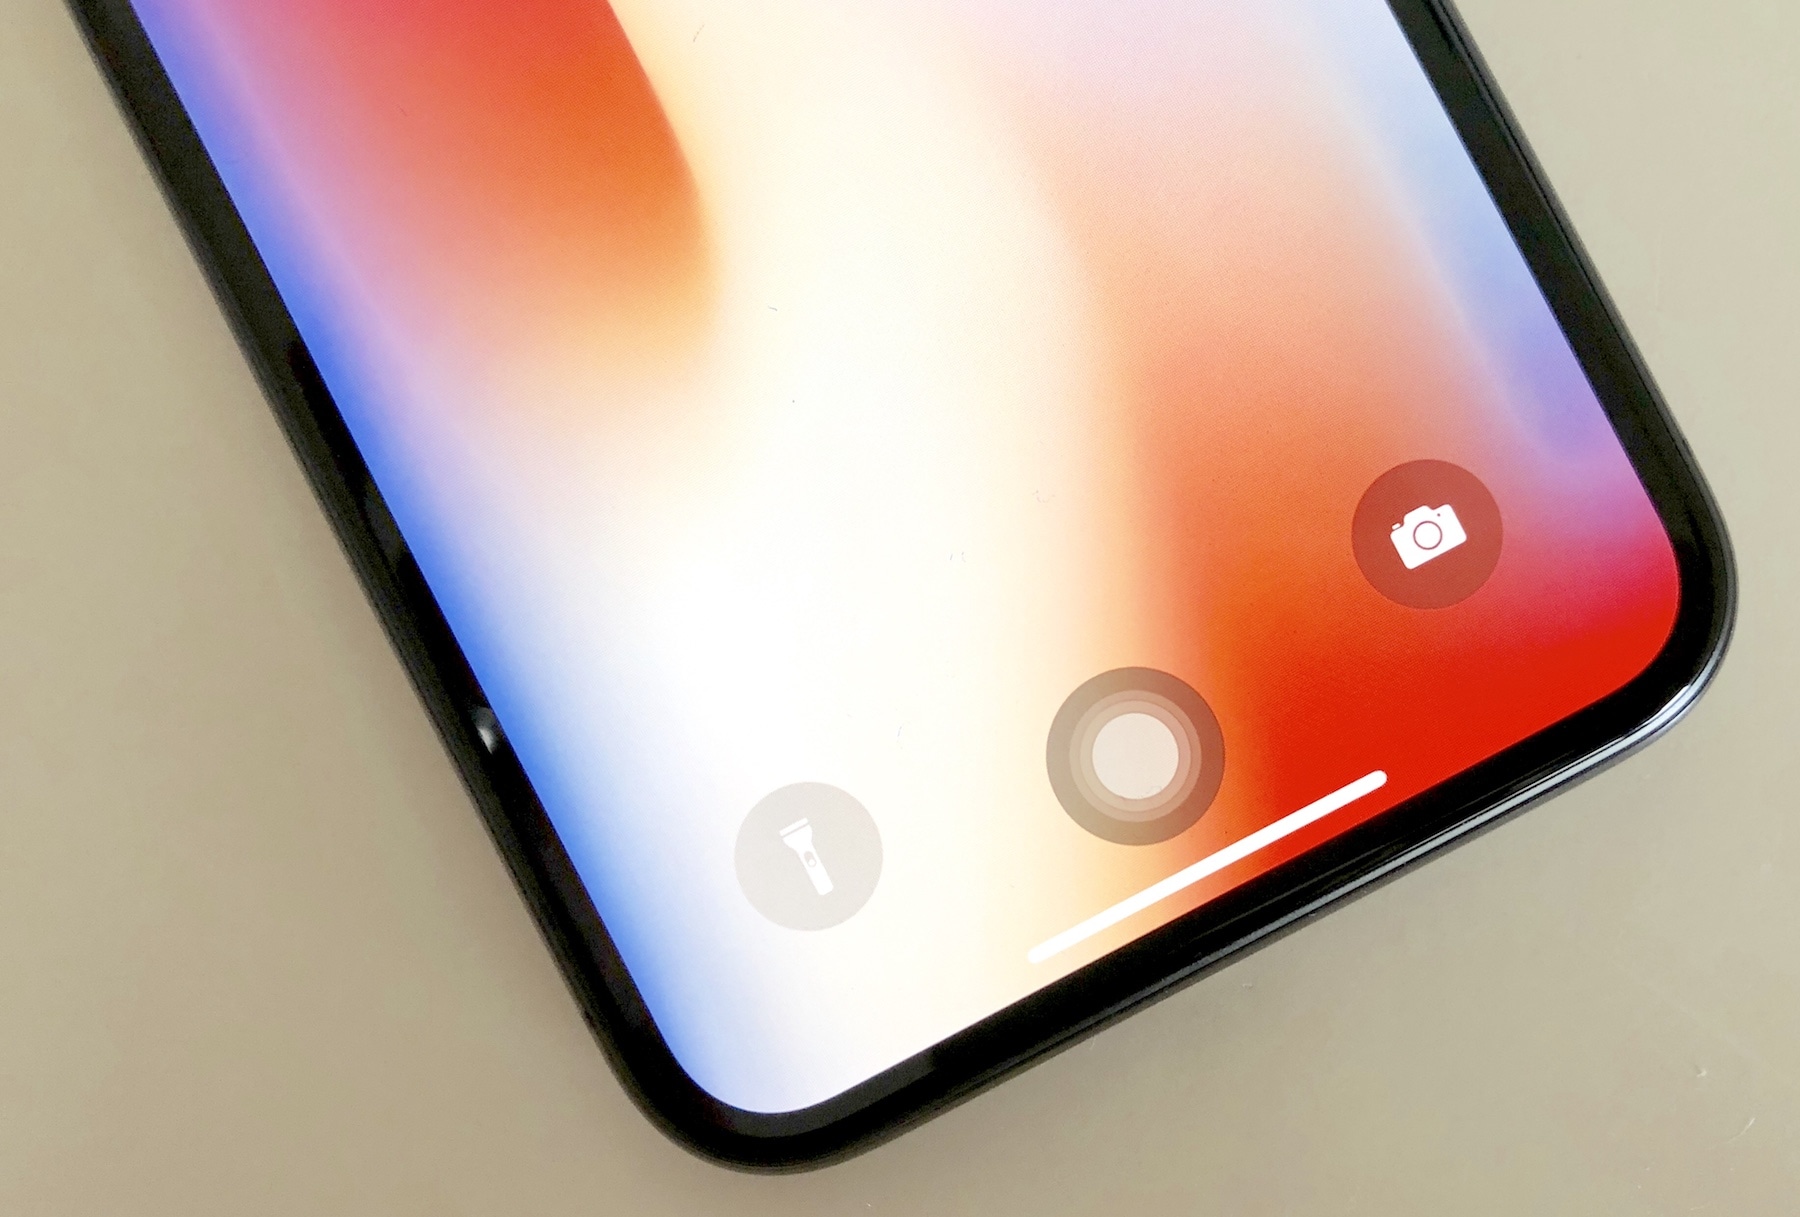 iPhone X Home button